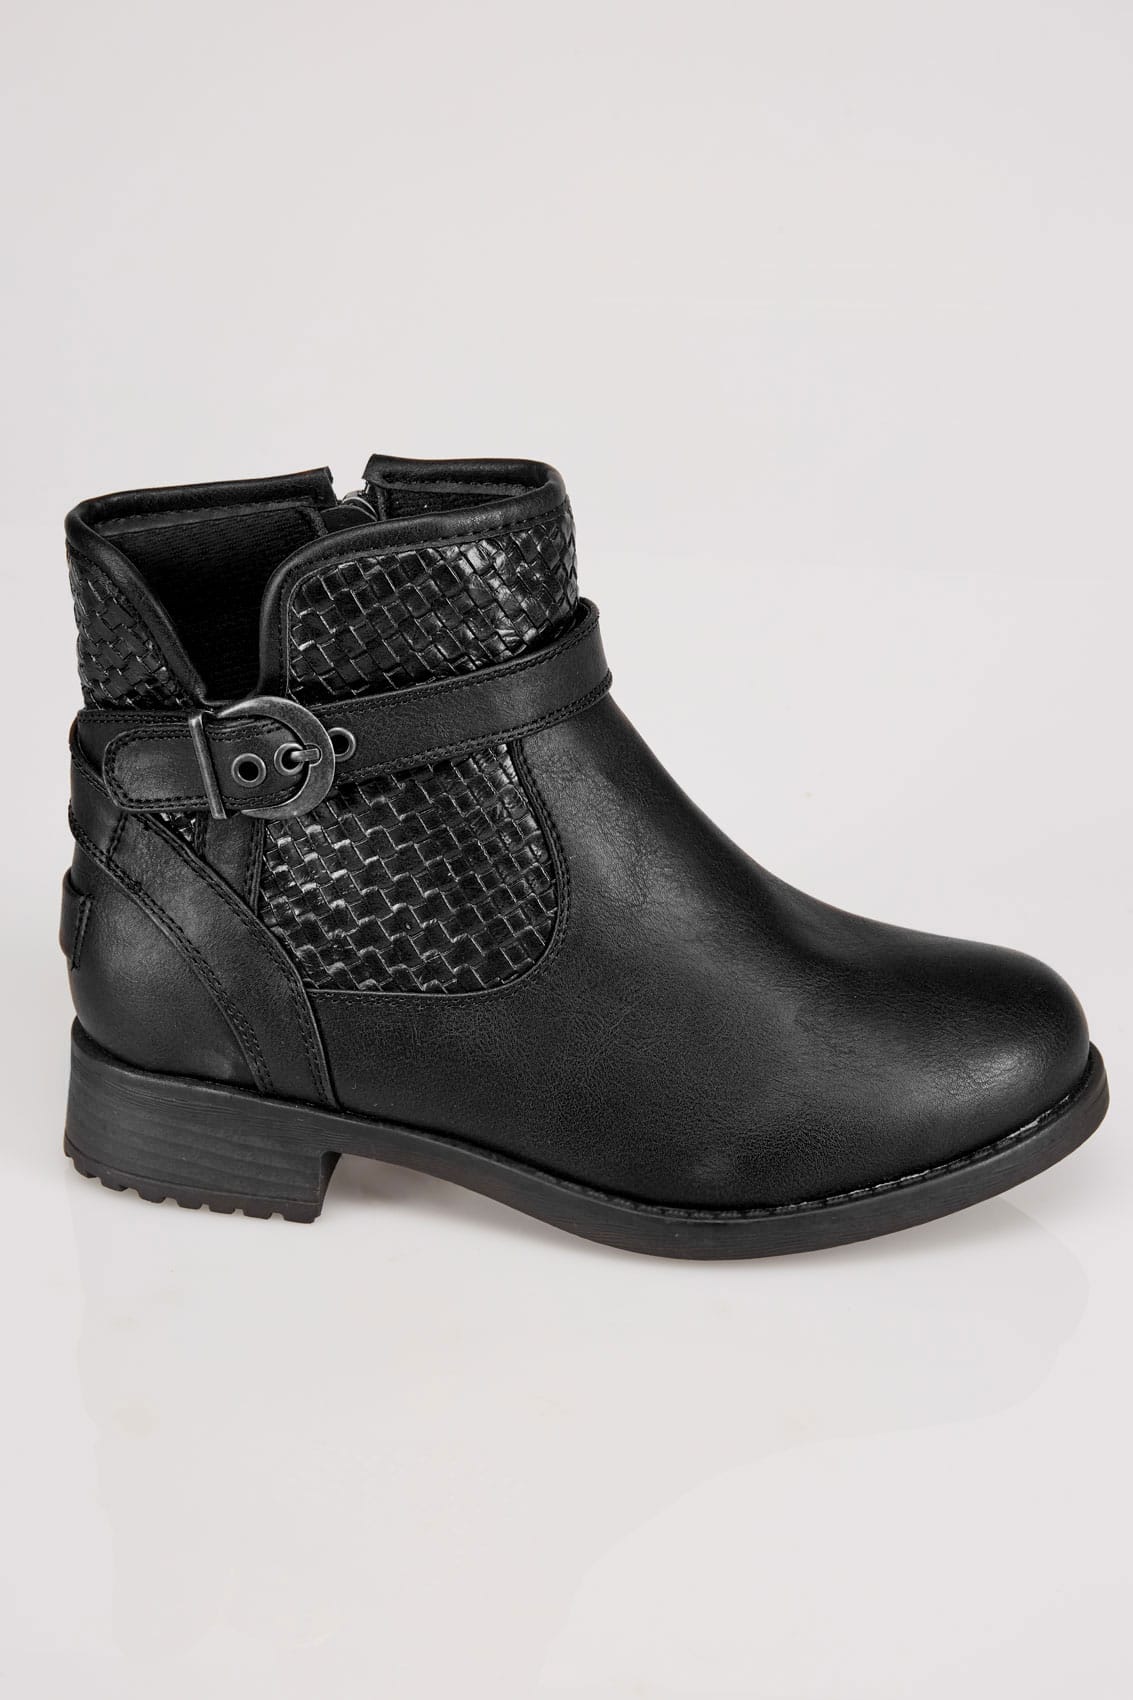 Black Whipstitch Ankle Boot In EEE Fit, Size 4EEE,5EEE 